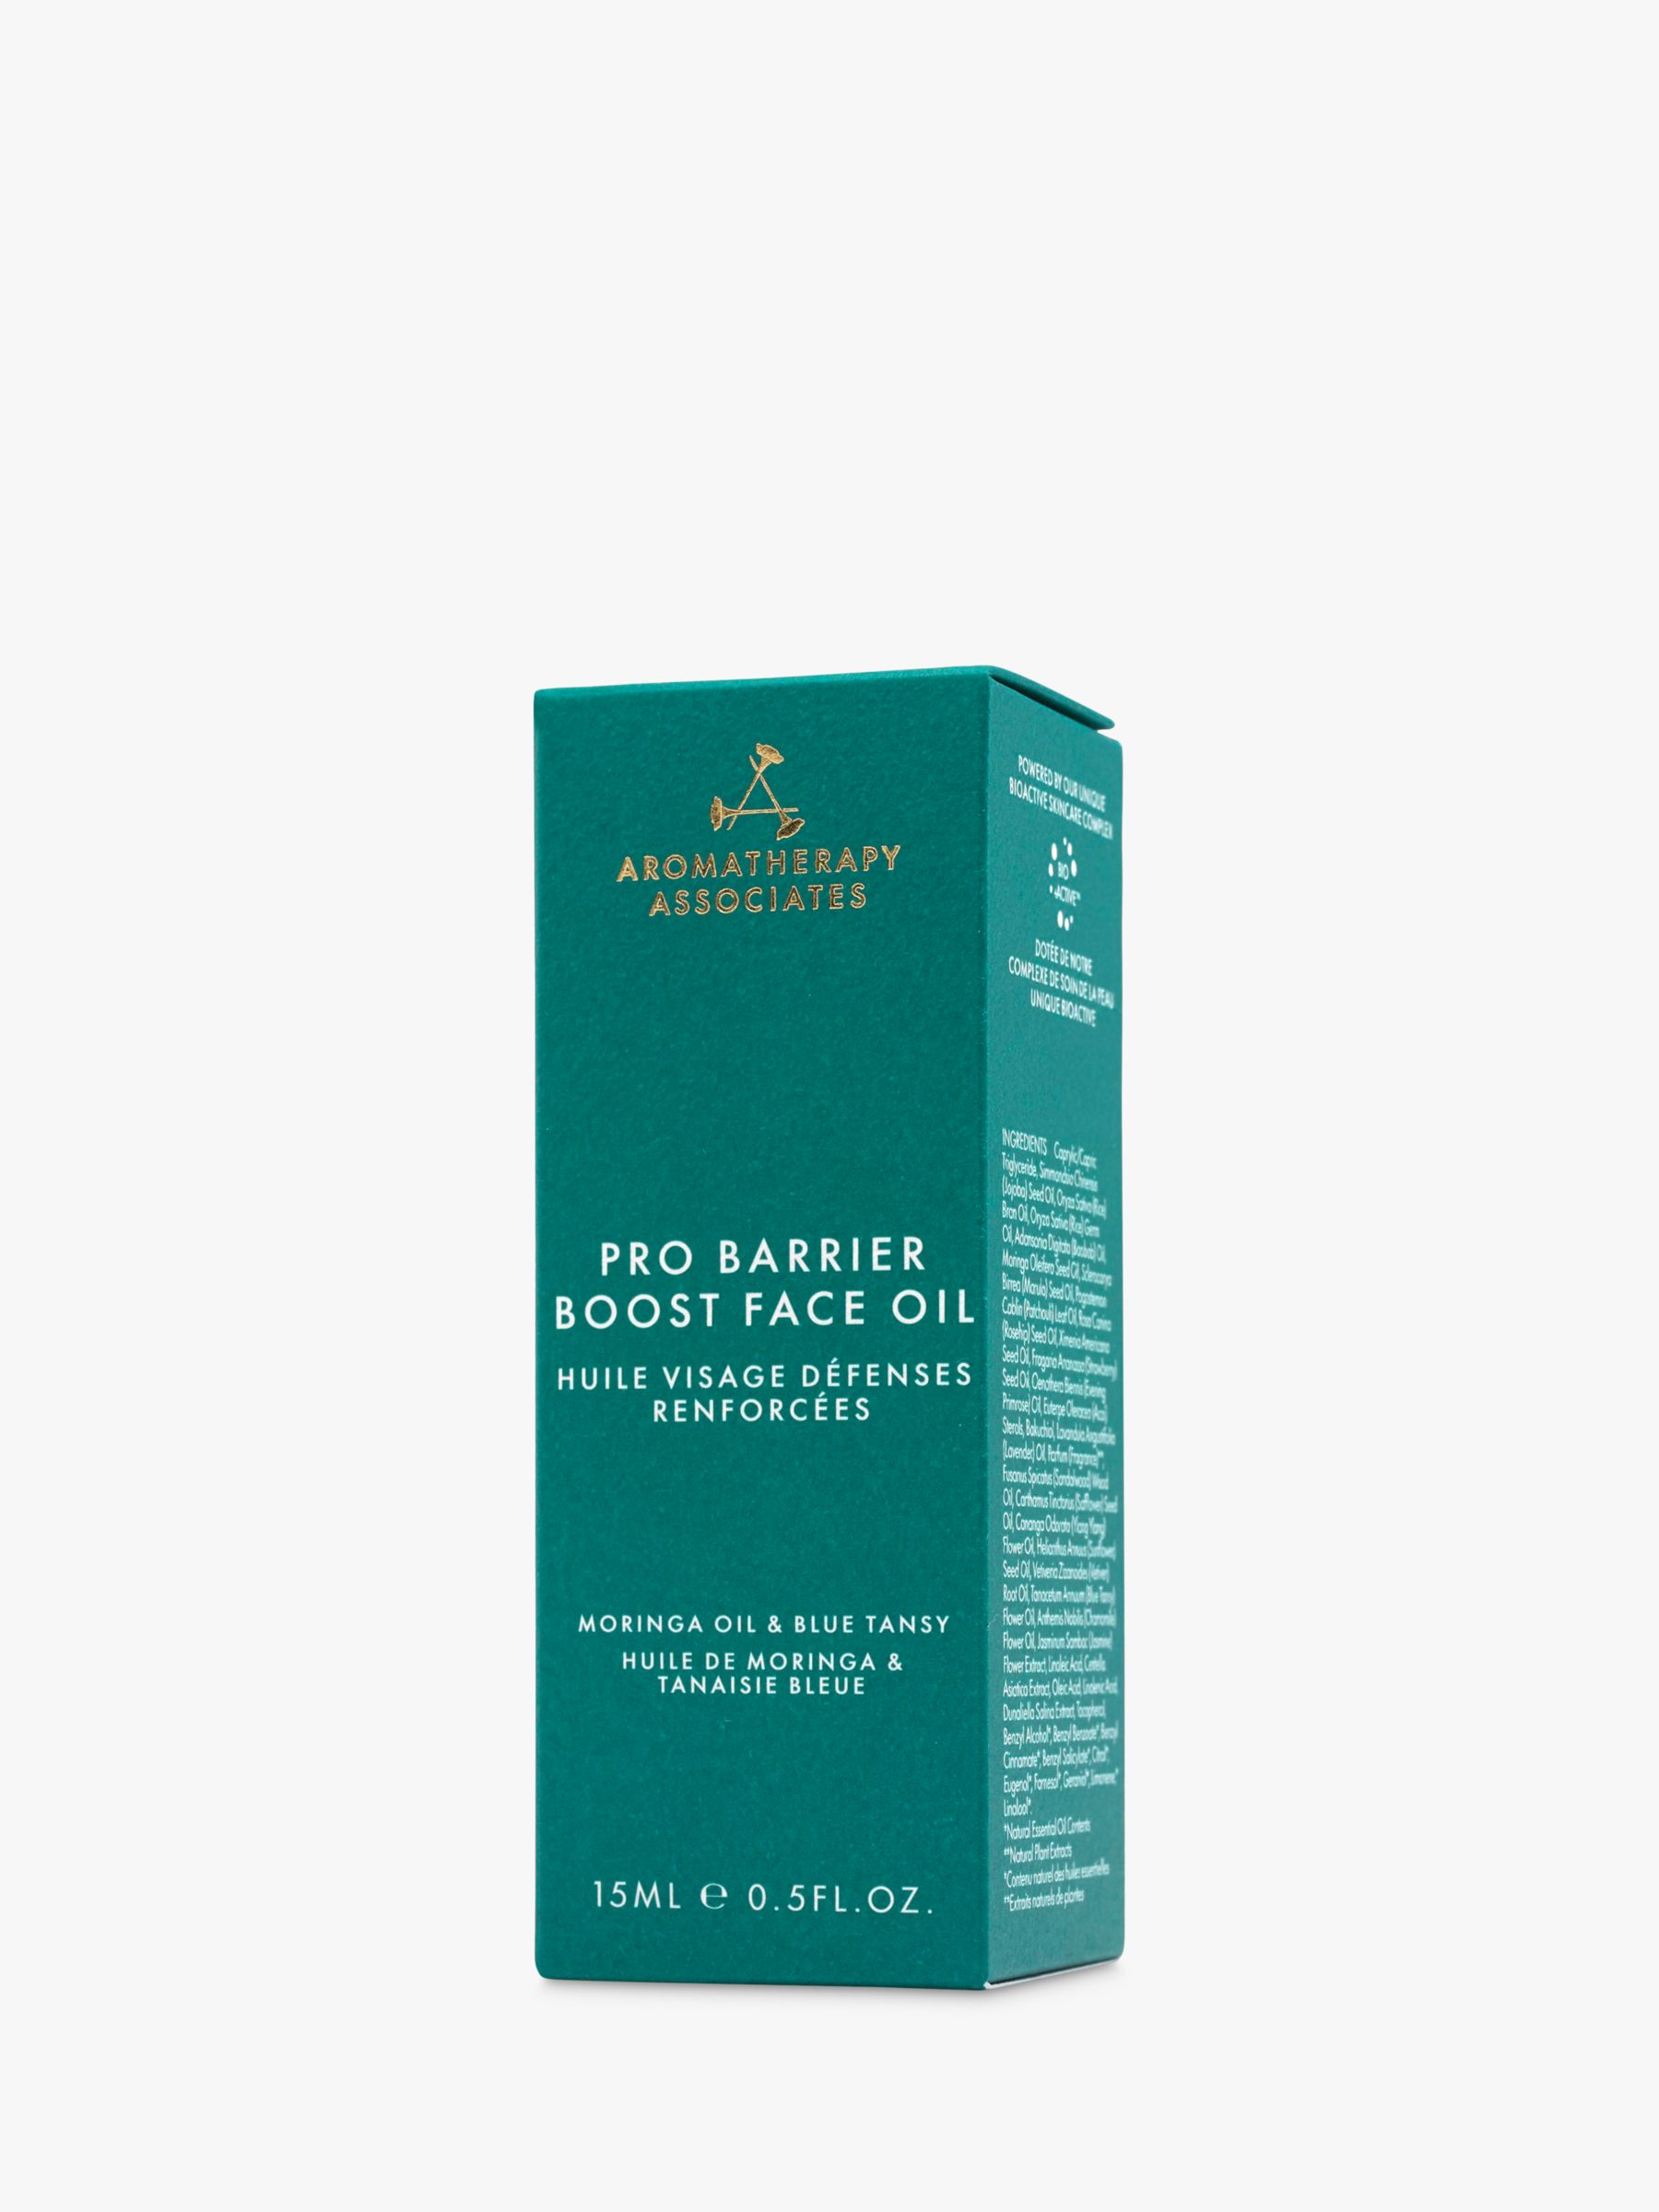 Aromatherapy Associates Pro Barrier Boost Face Oil, 15ml 3